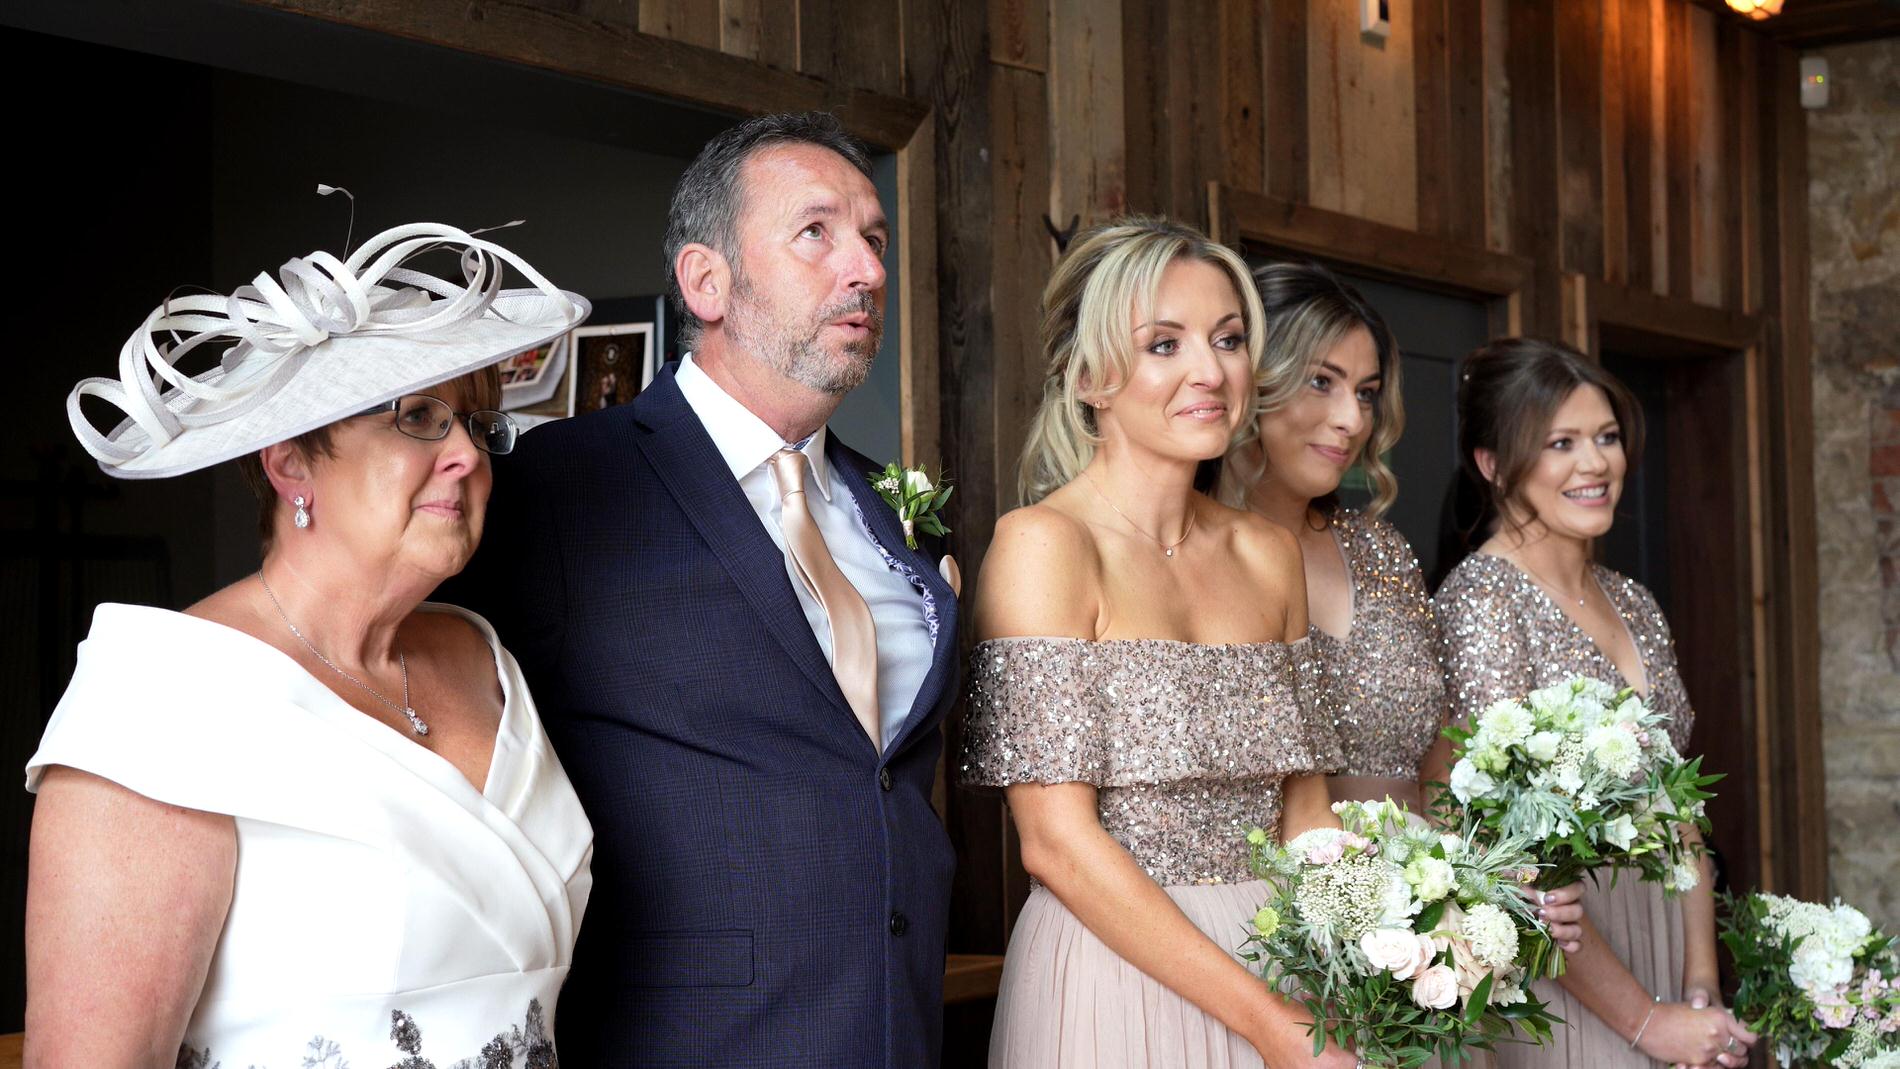 dad and bridesmaids look emotional seeing the bride for the first time